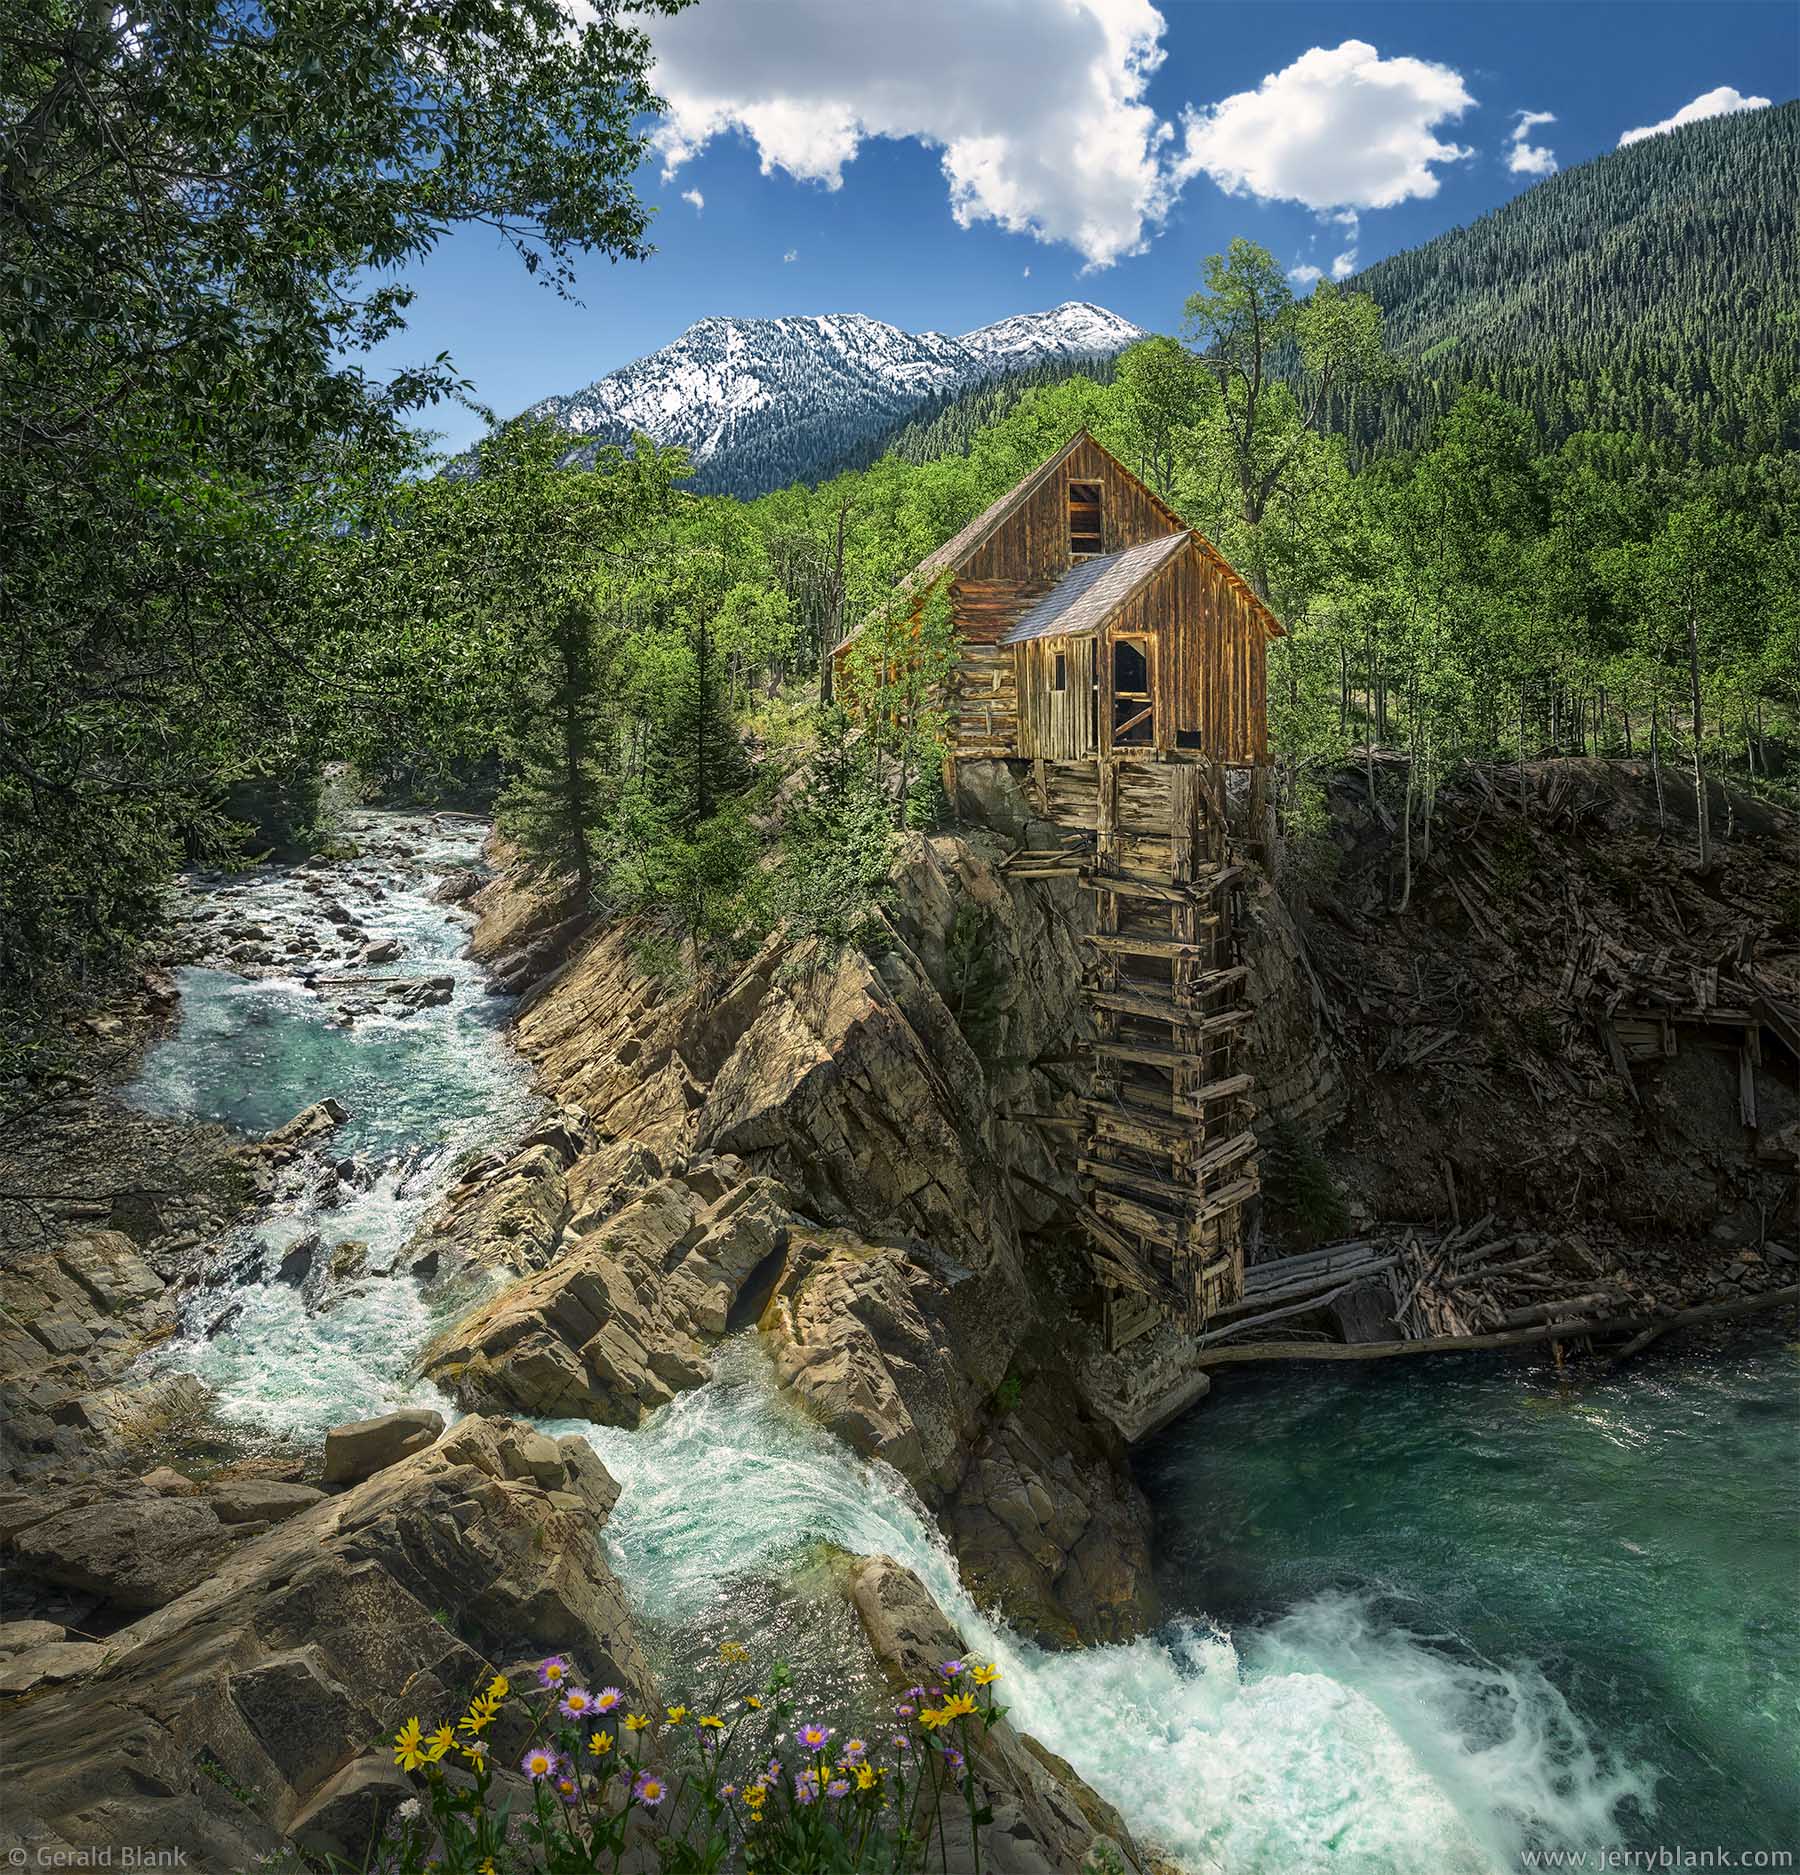 23629 - The historic Crystal Mill on the Crystal River, White River National Forest, CO, with Crystal Peak in the background - photo by Jerry Blank